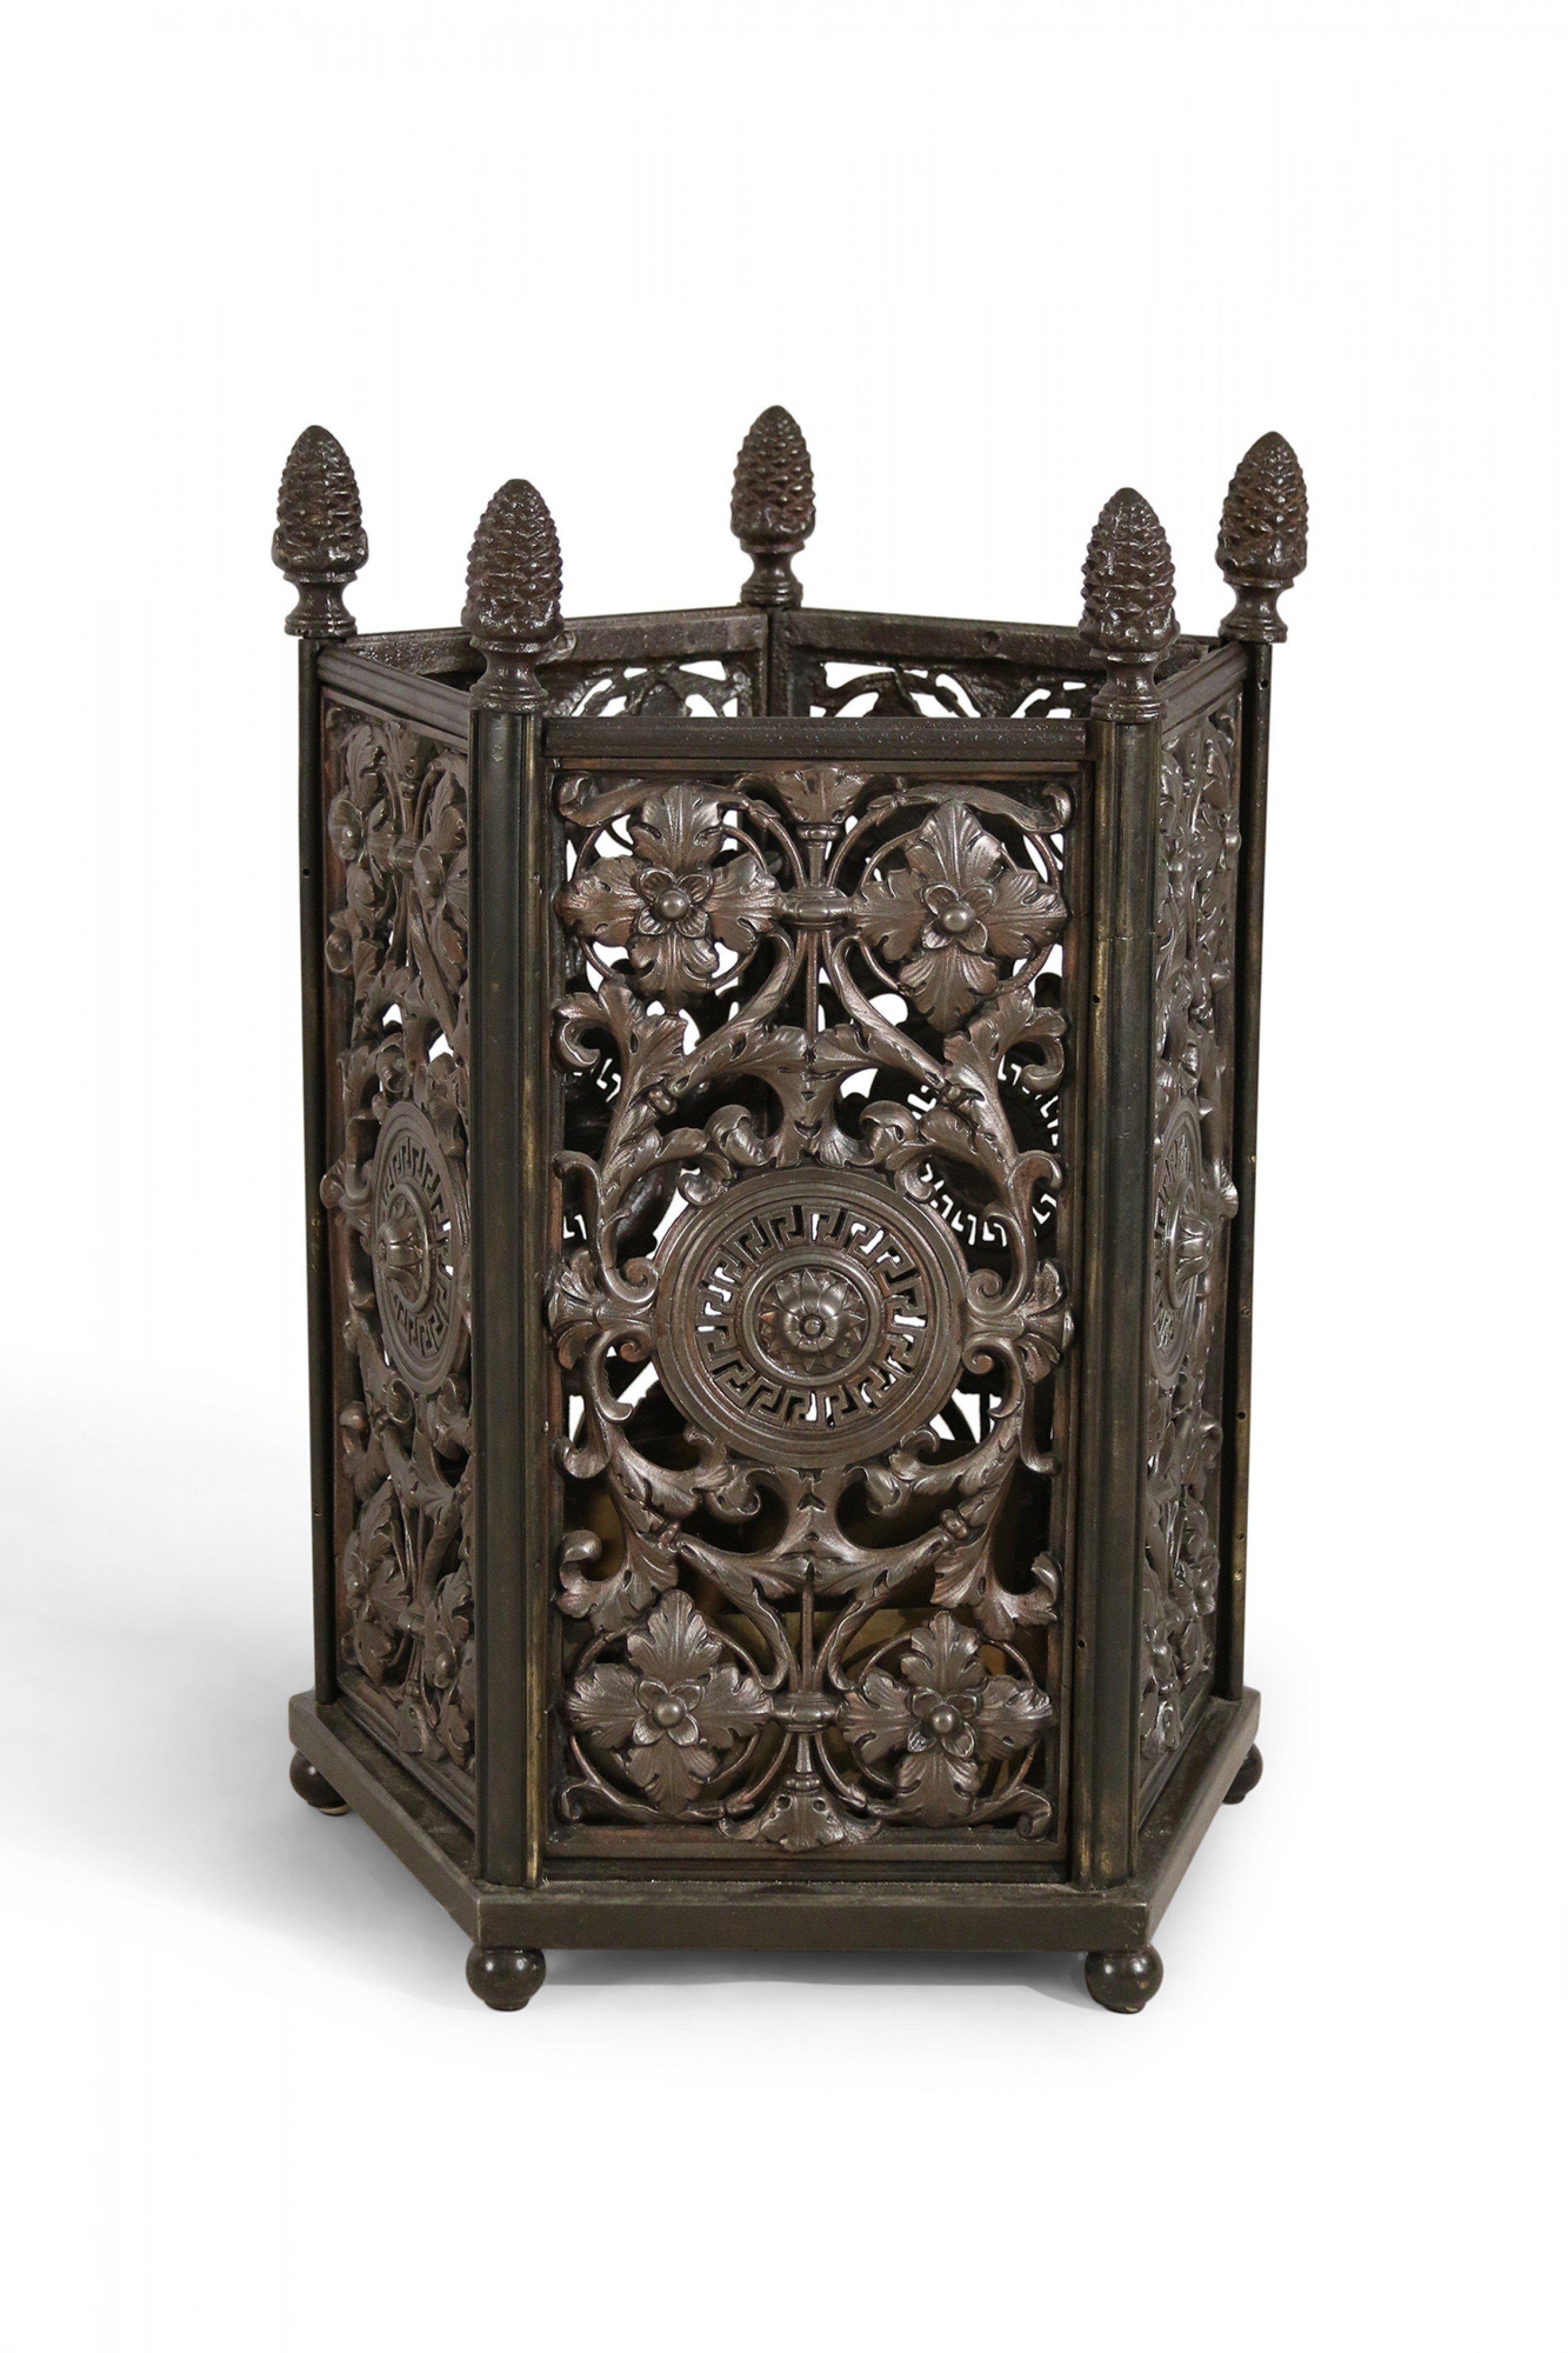 Pair of Italian Renaissance Revival Metal Filigree Pentagonal Umbrella Stands In Good Condition For Sale In New York, NY